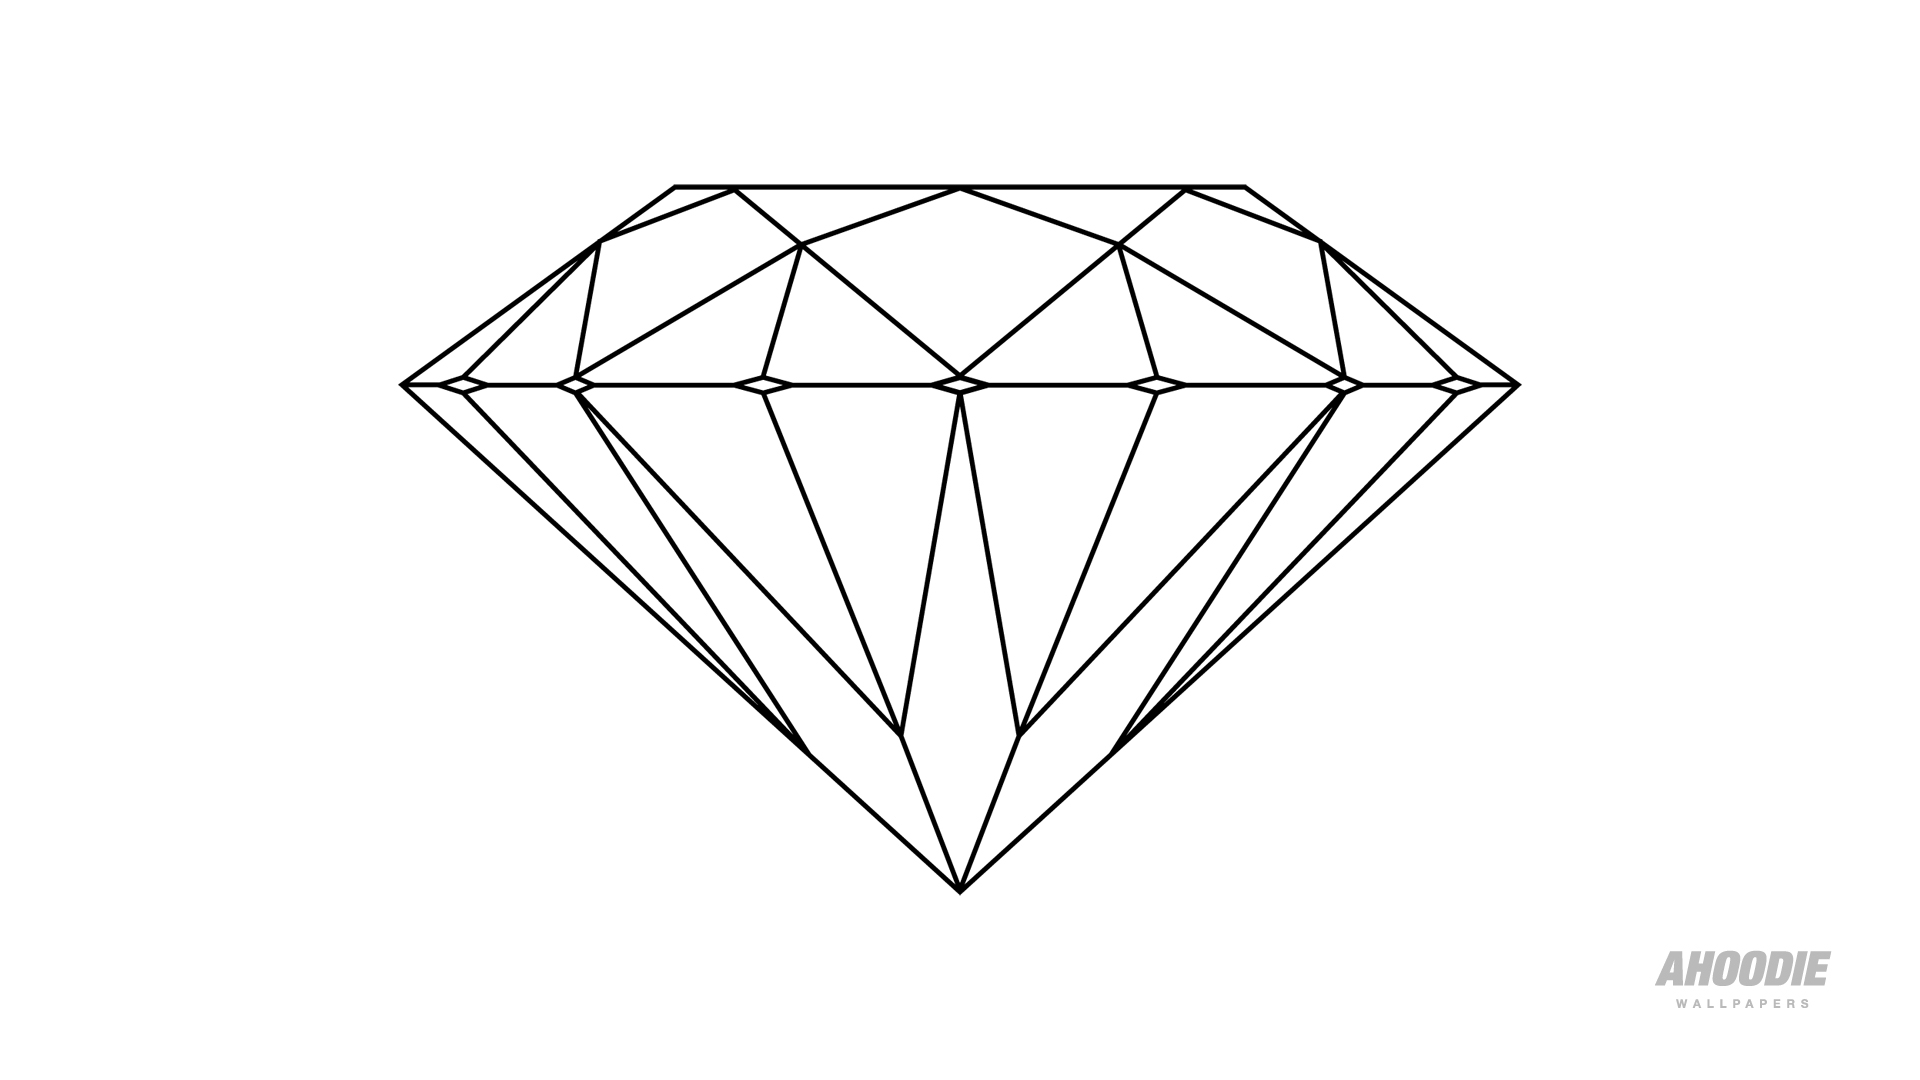 The diamond in a dream symbolizes your defeat in attempt to reach the